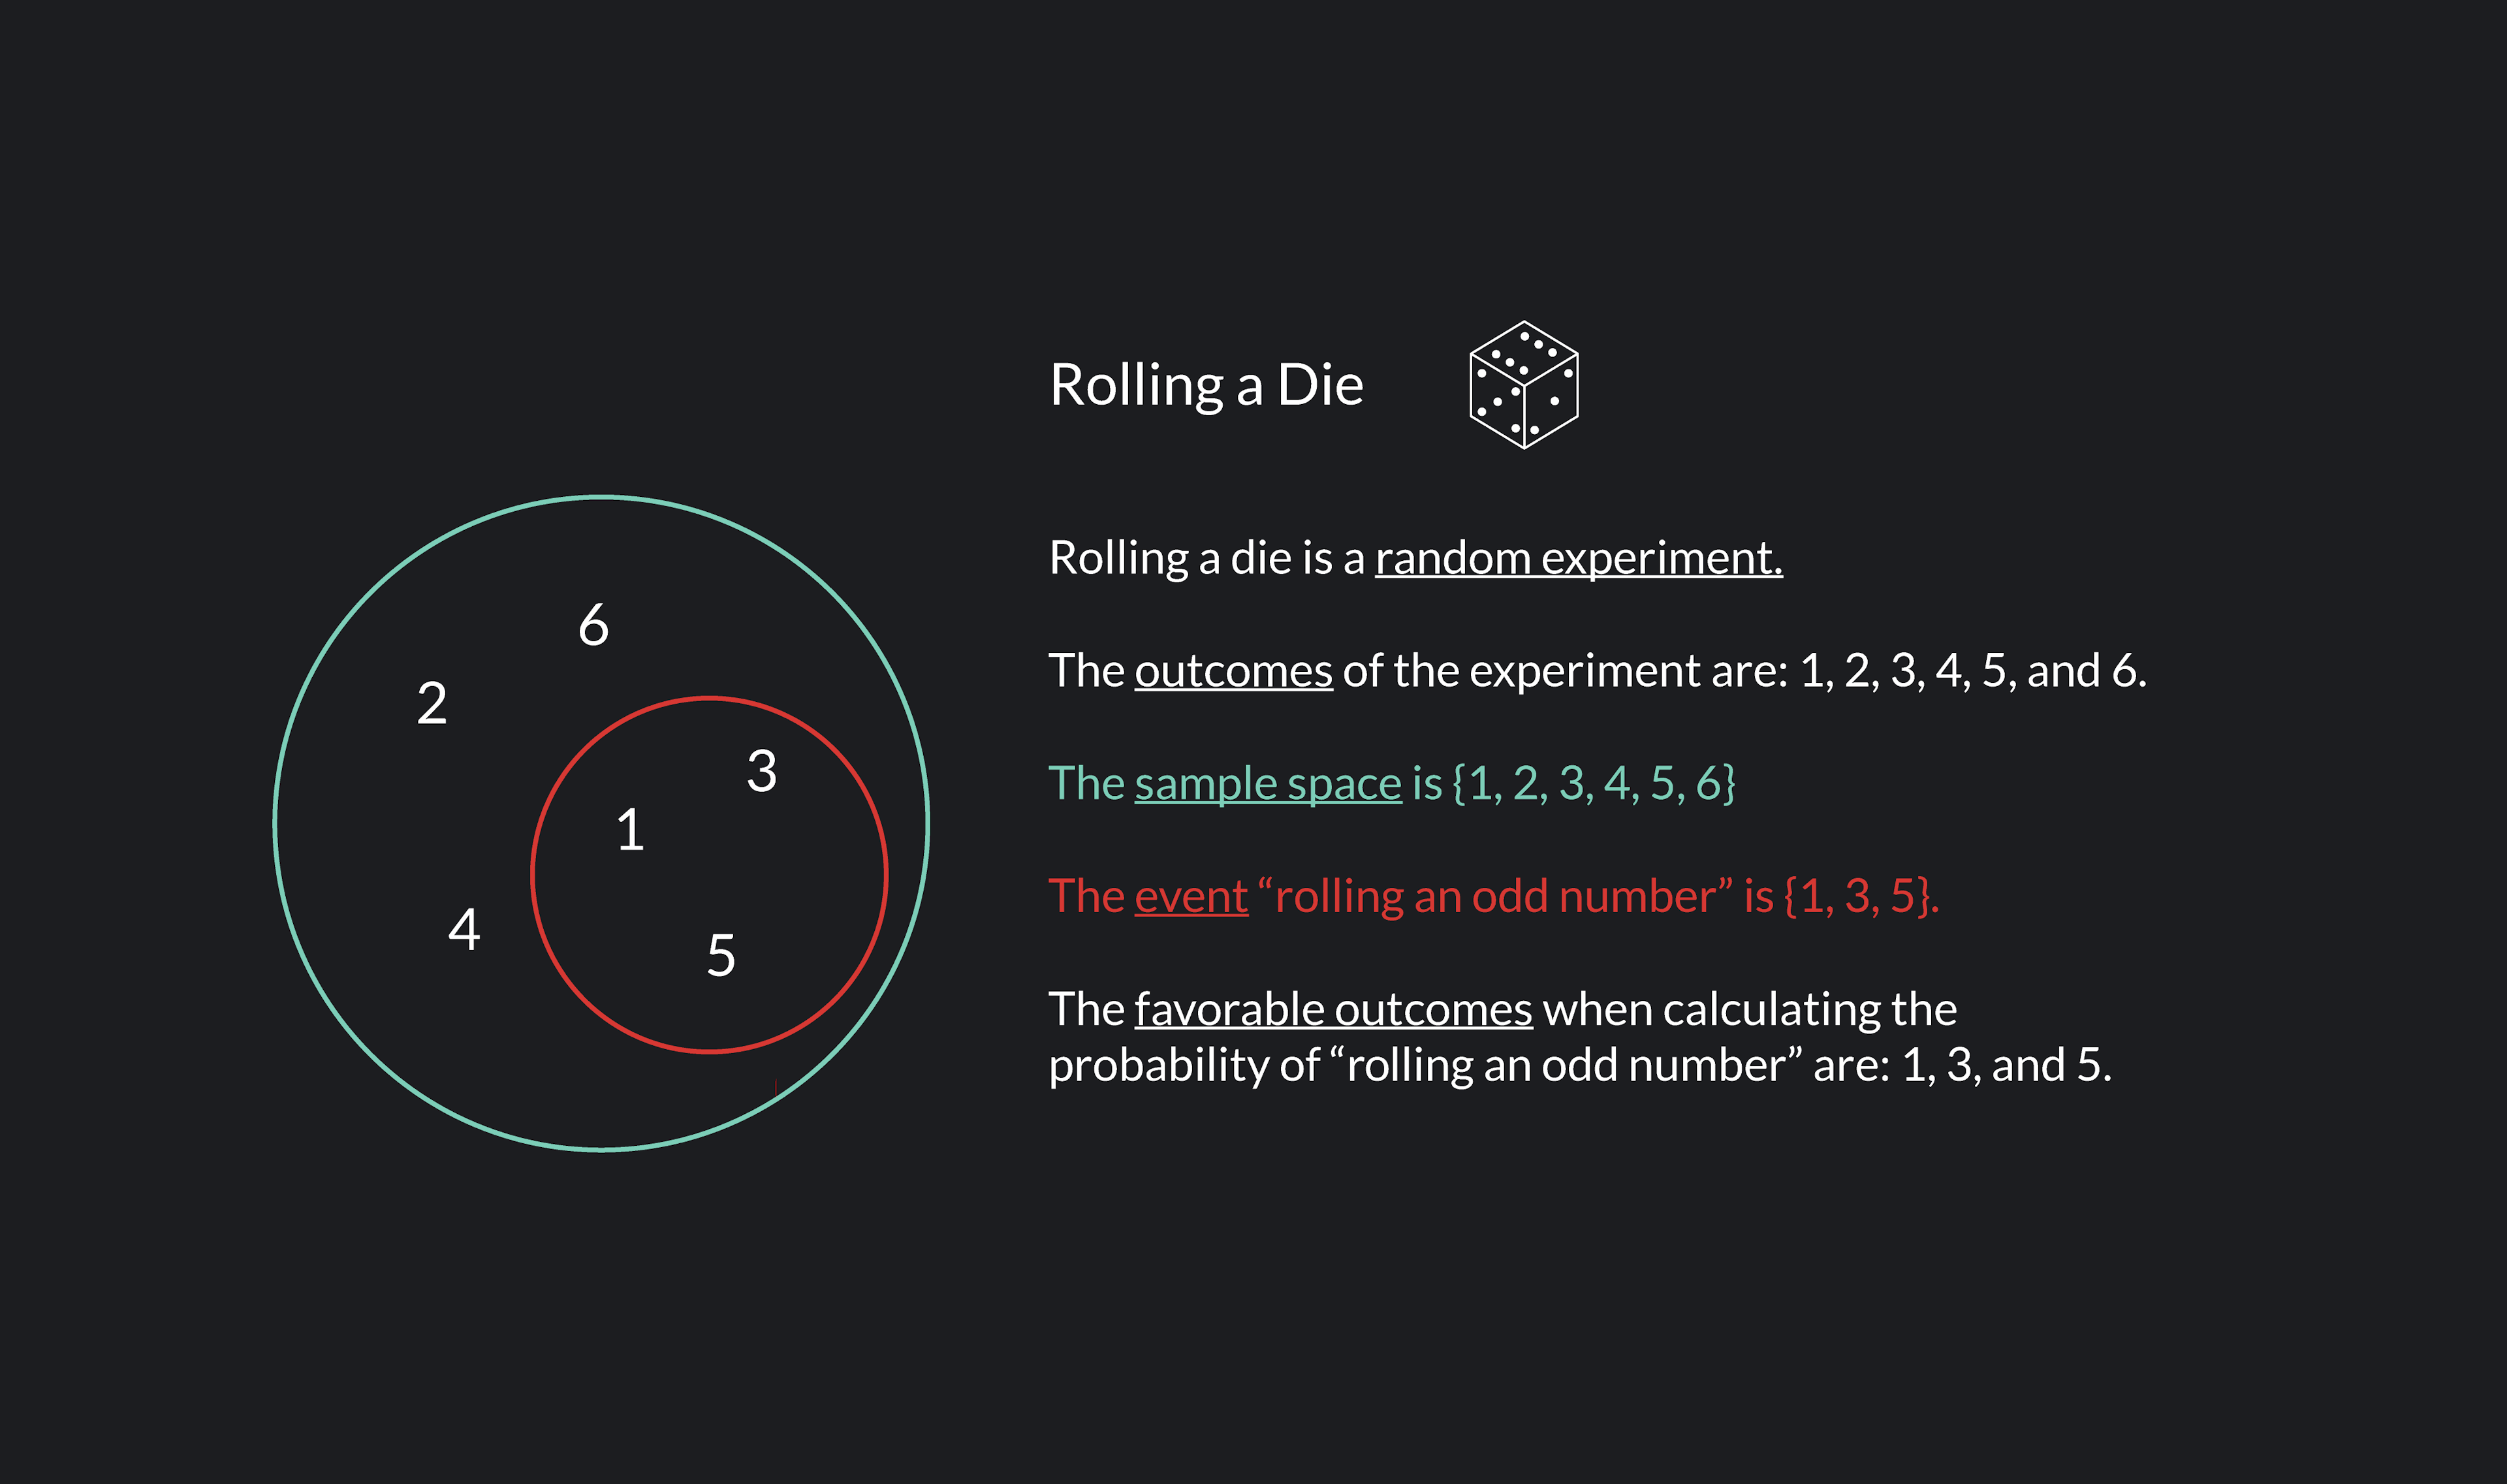 Rolling a die graphic showing a random experiment, outcomes, sample space and favorable outcomes